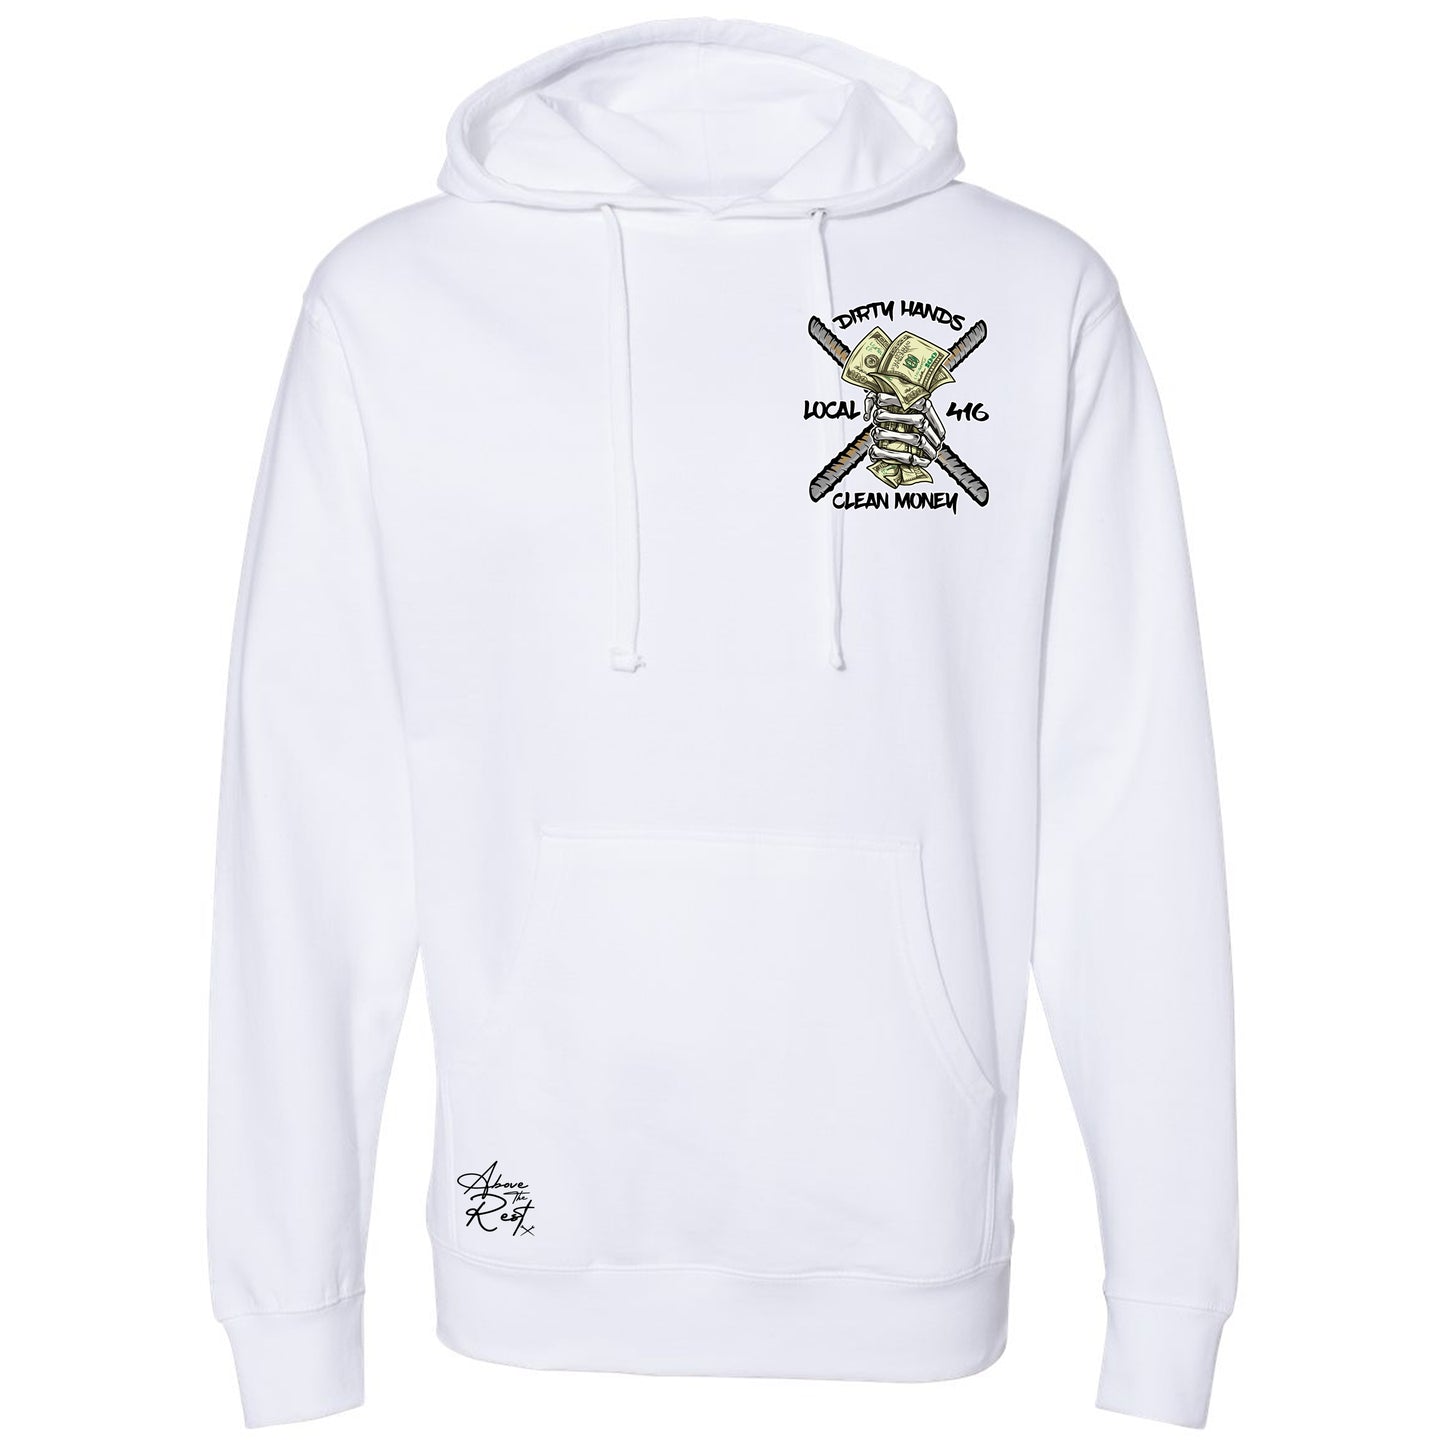 DIRTY HANDS PULLOVER HOODIE LOCAL 416